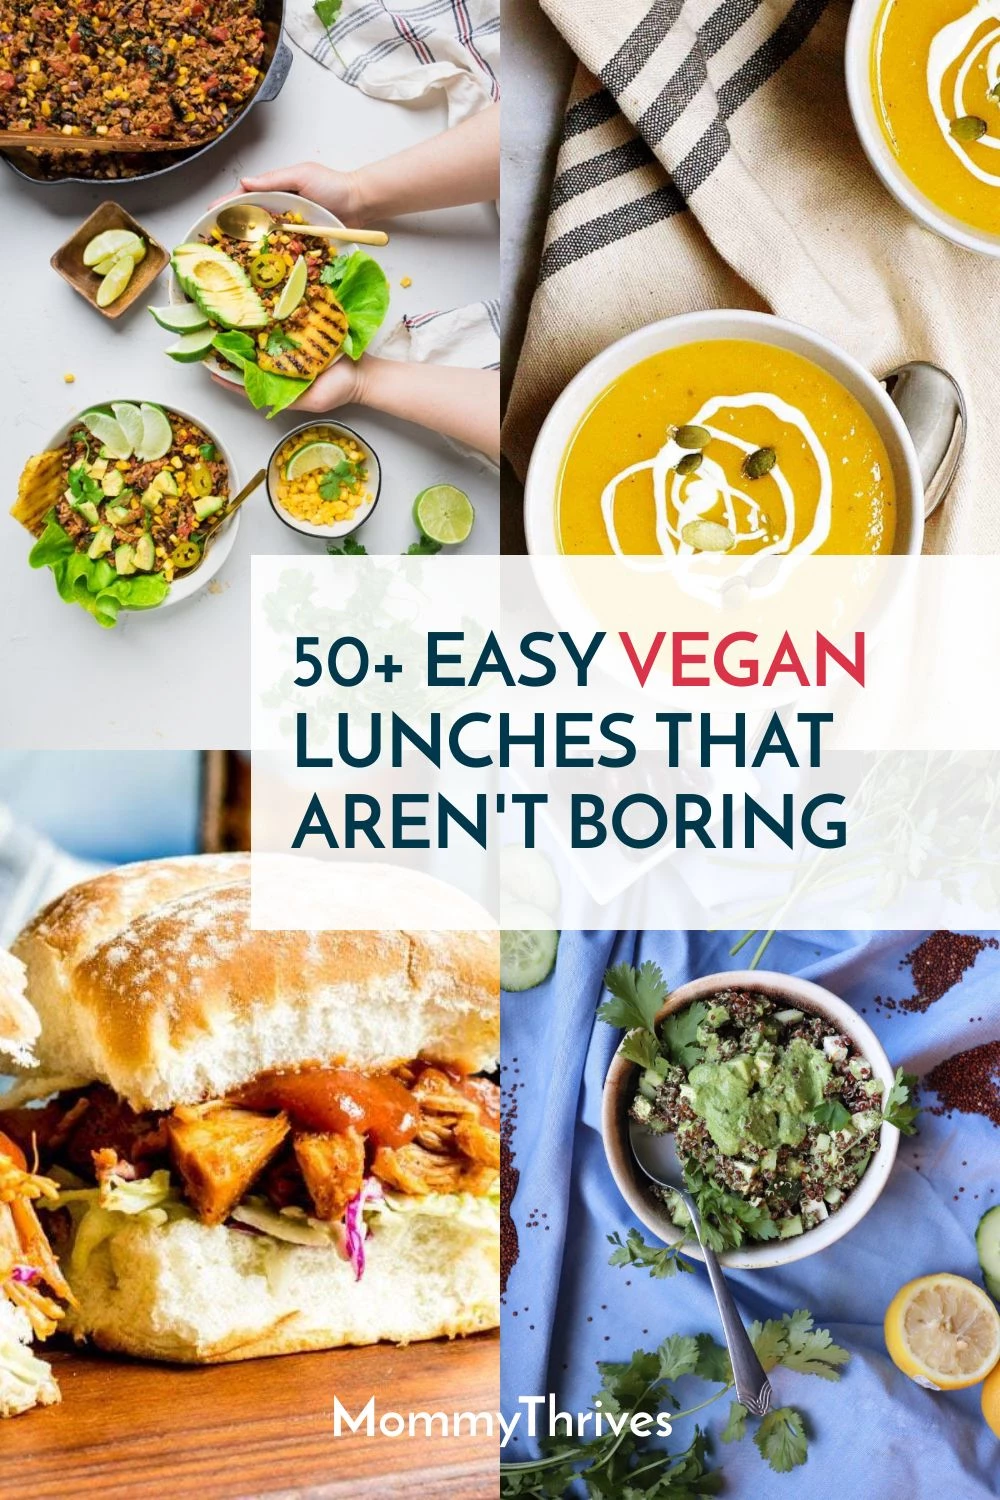 https://www.mommythrives.com/wp-content/uploads/2019/05/Easy-Vegan-Lunches-For-Work-Healthy-Vegan-Lunch-Ideas-Vegan-Lunches-To-Pack-For-Work.webp